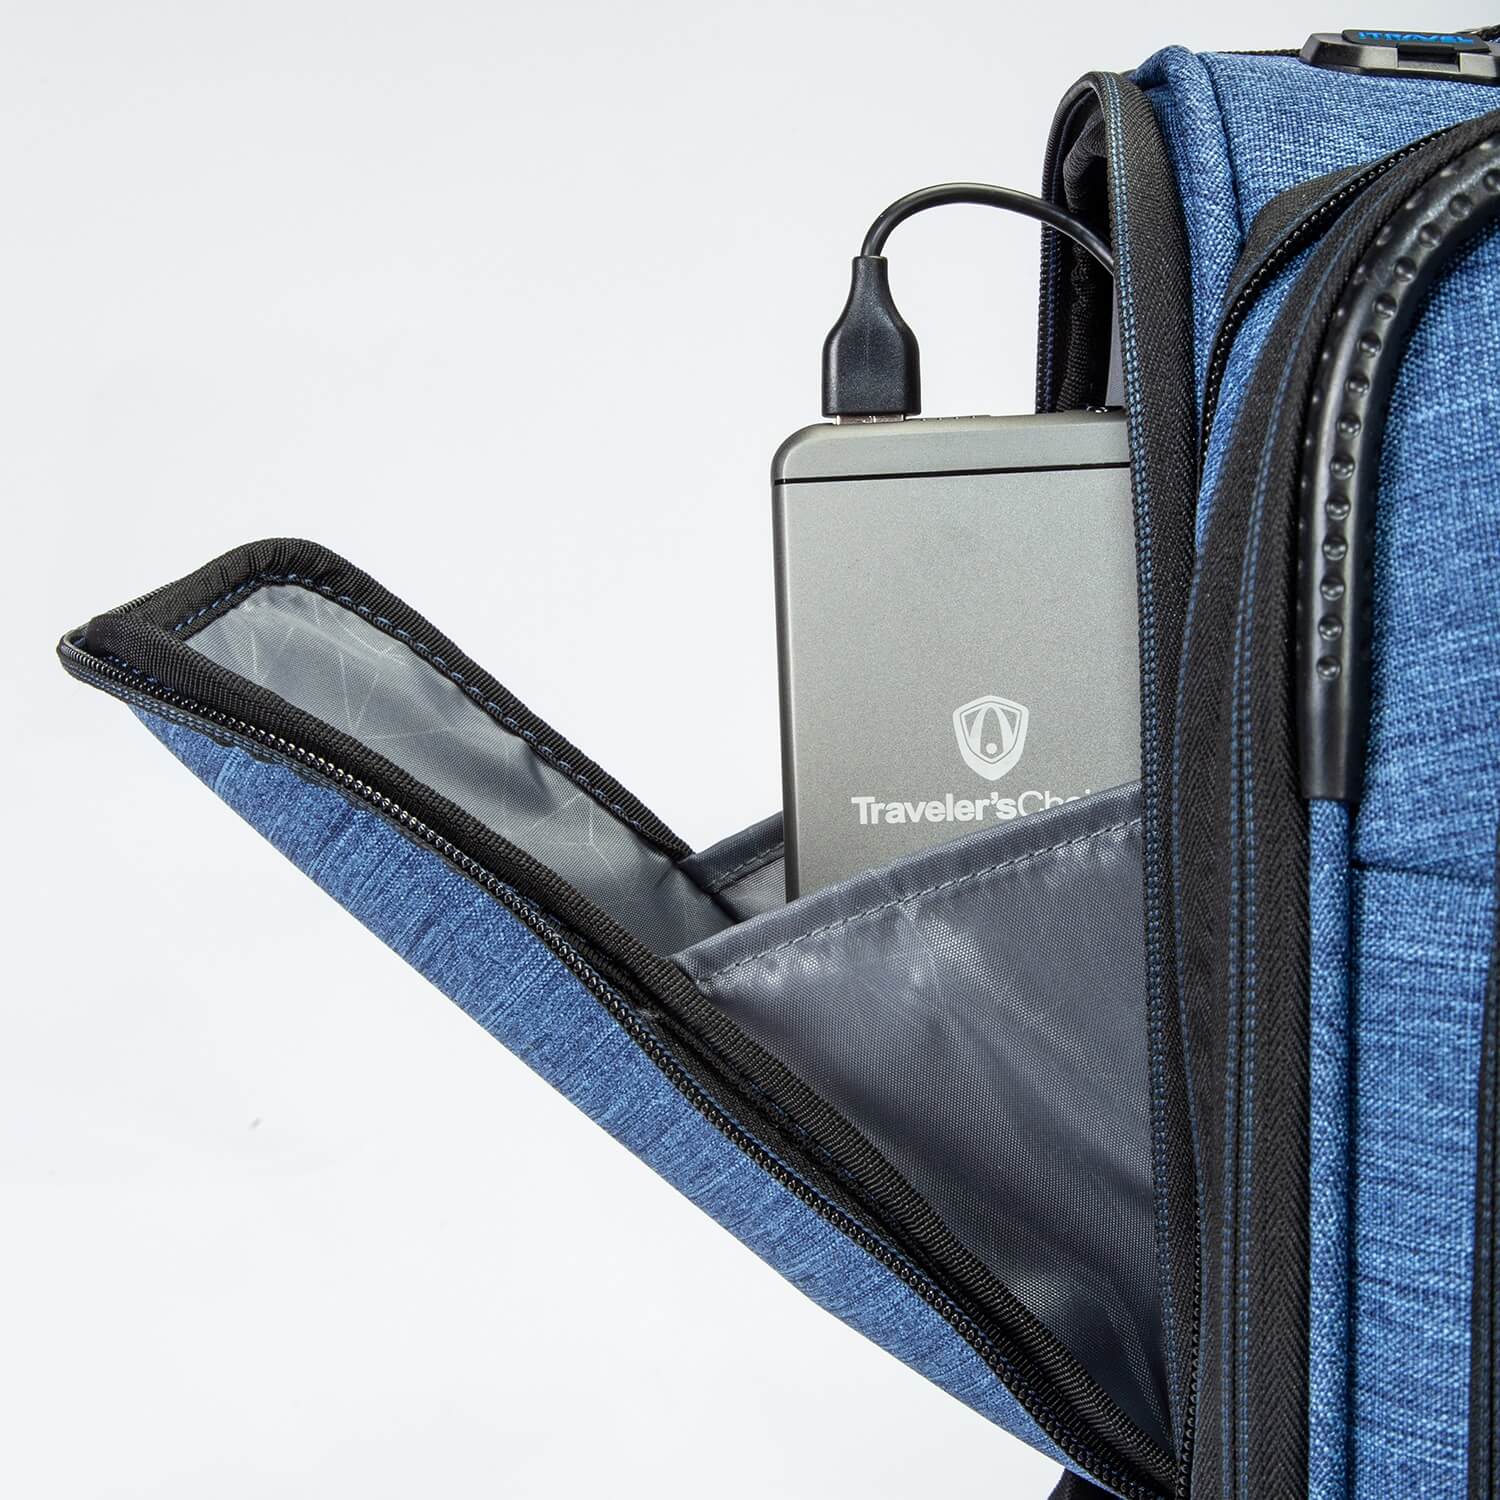 Image of a luggage that has a portable charger in the front pocket.